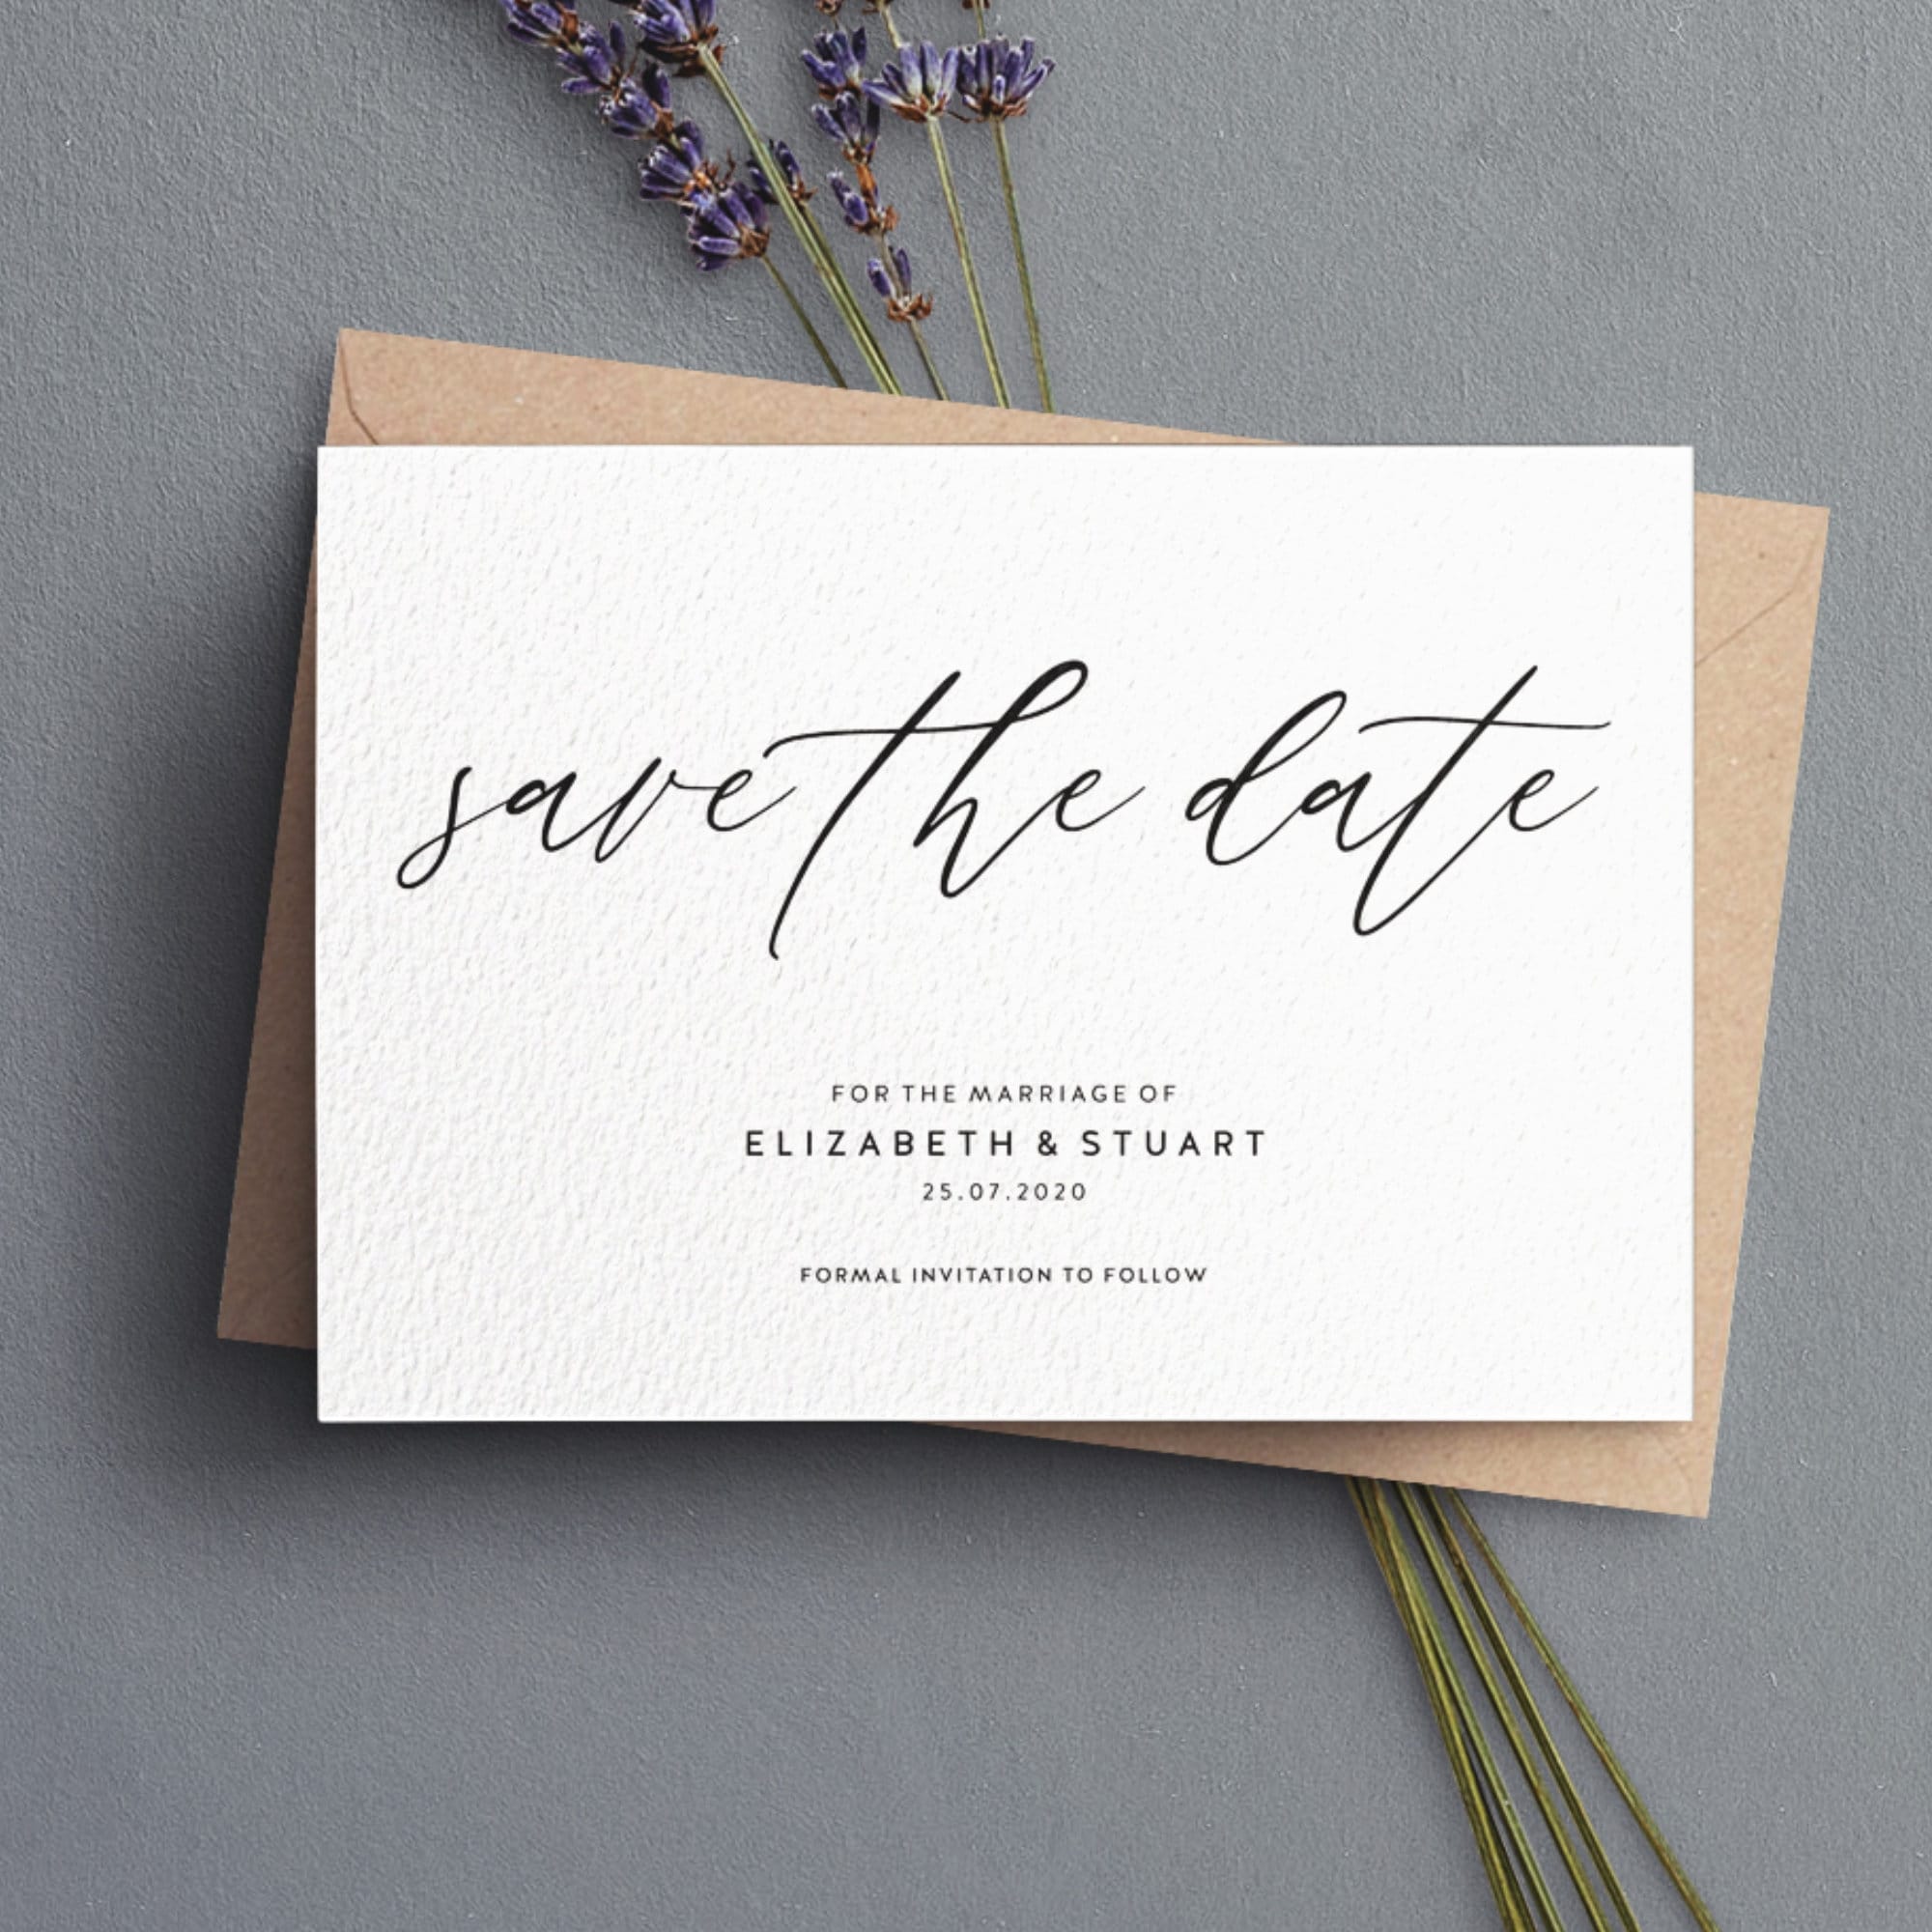 Examples Of Save The Date Cards For Events